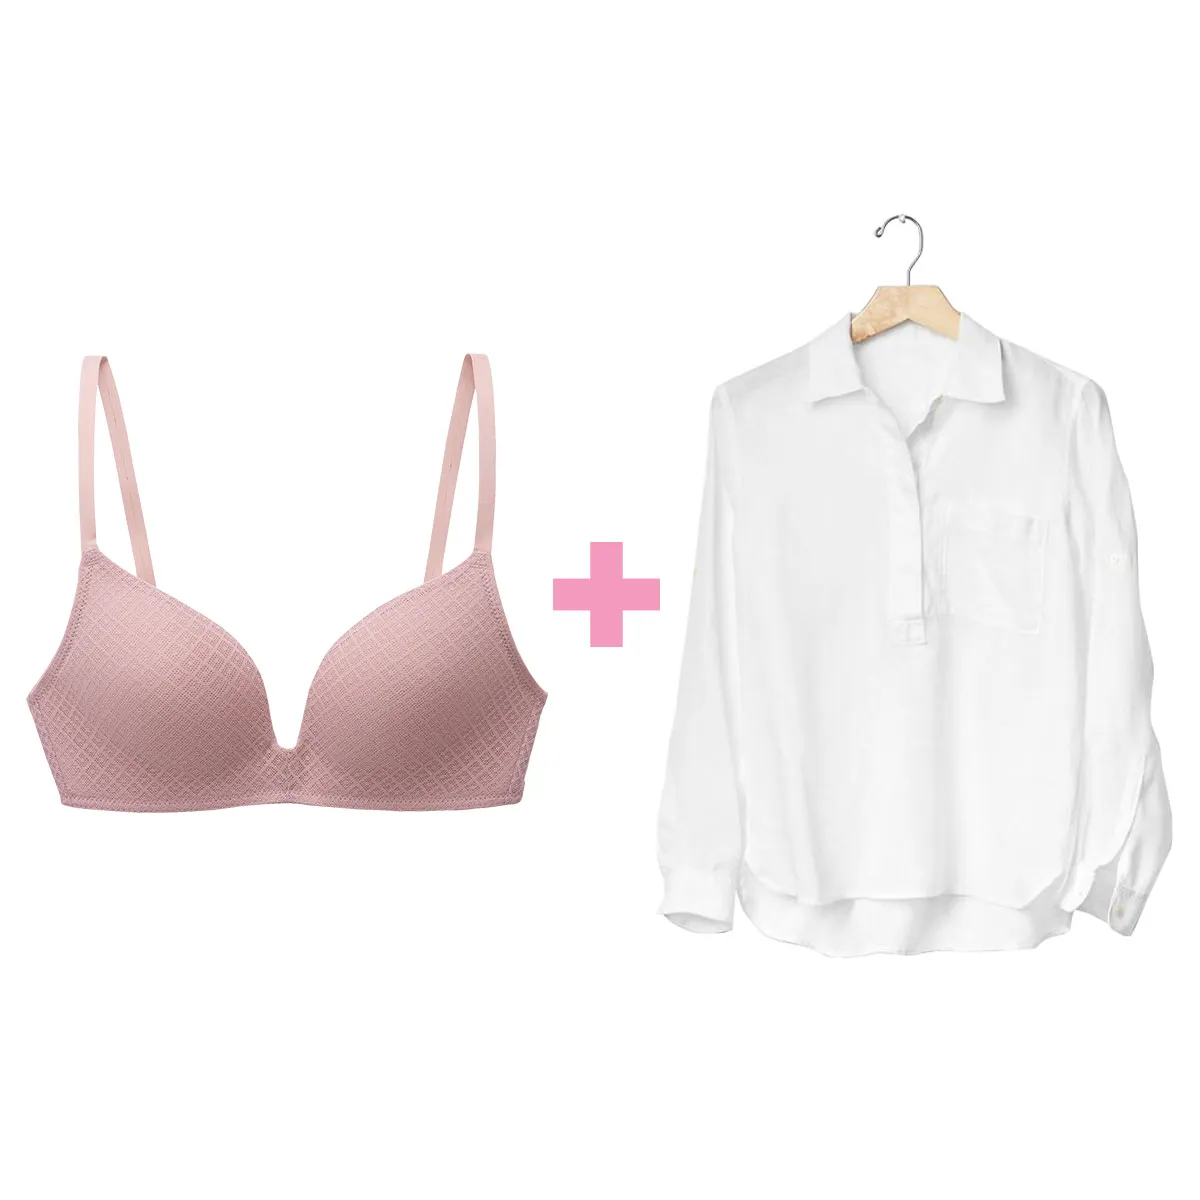 What color bra do you wear under a white shirt